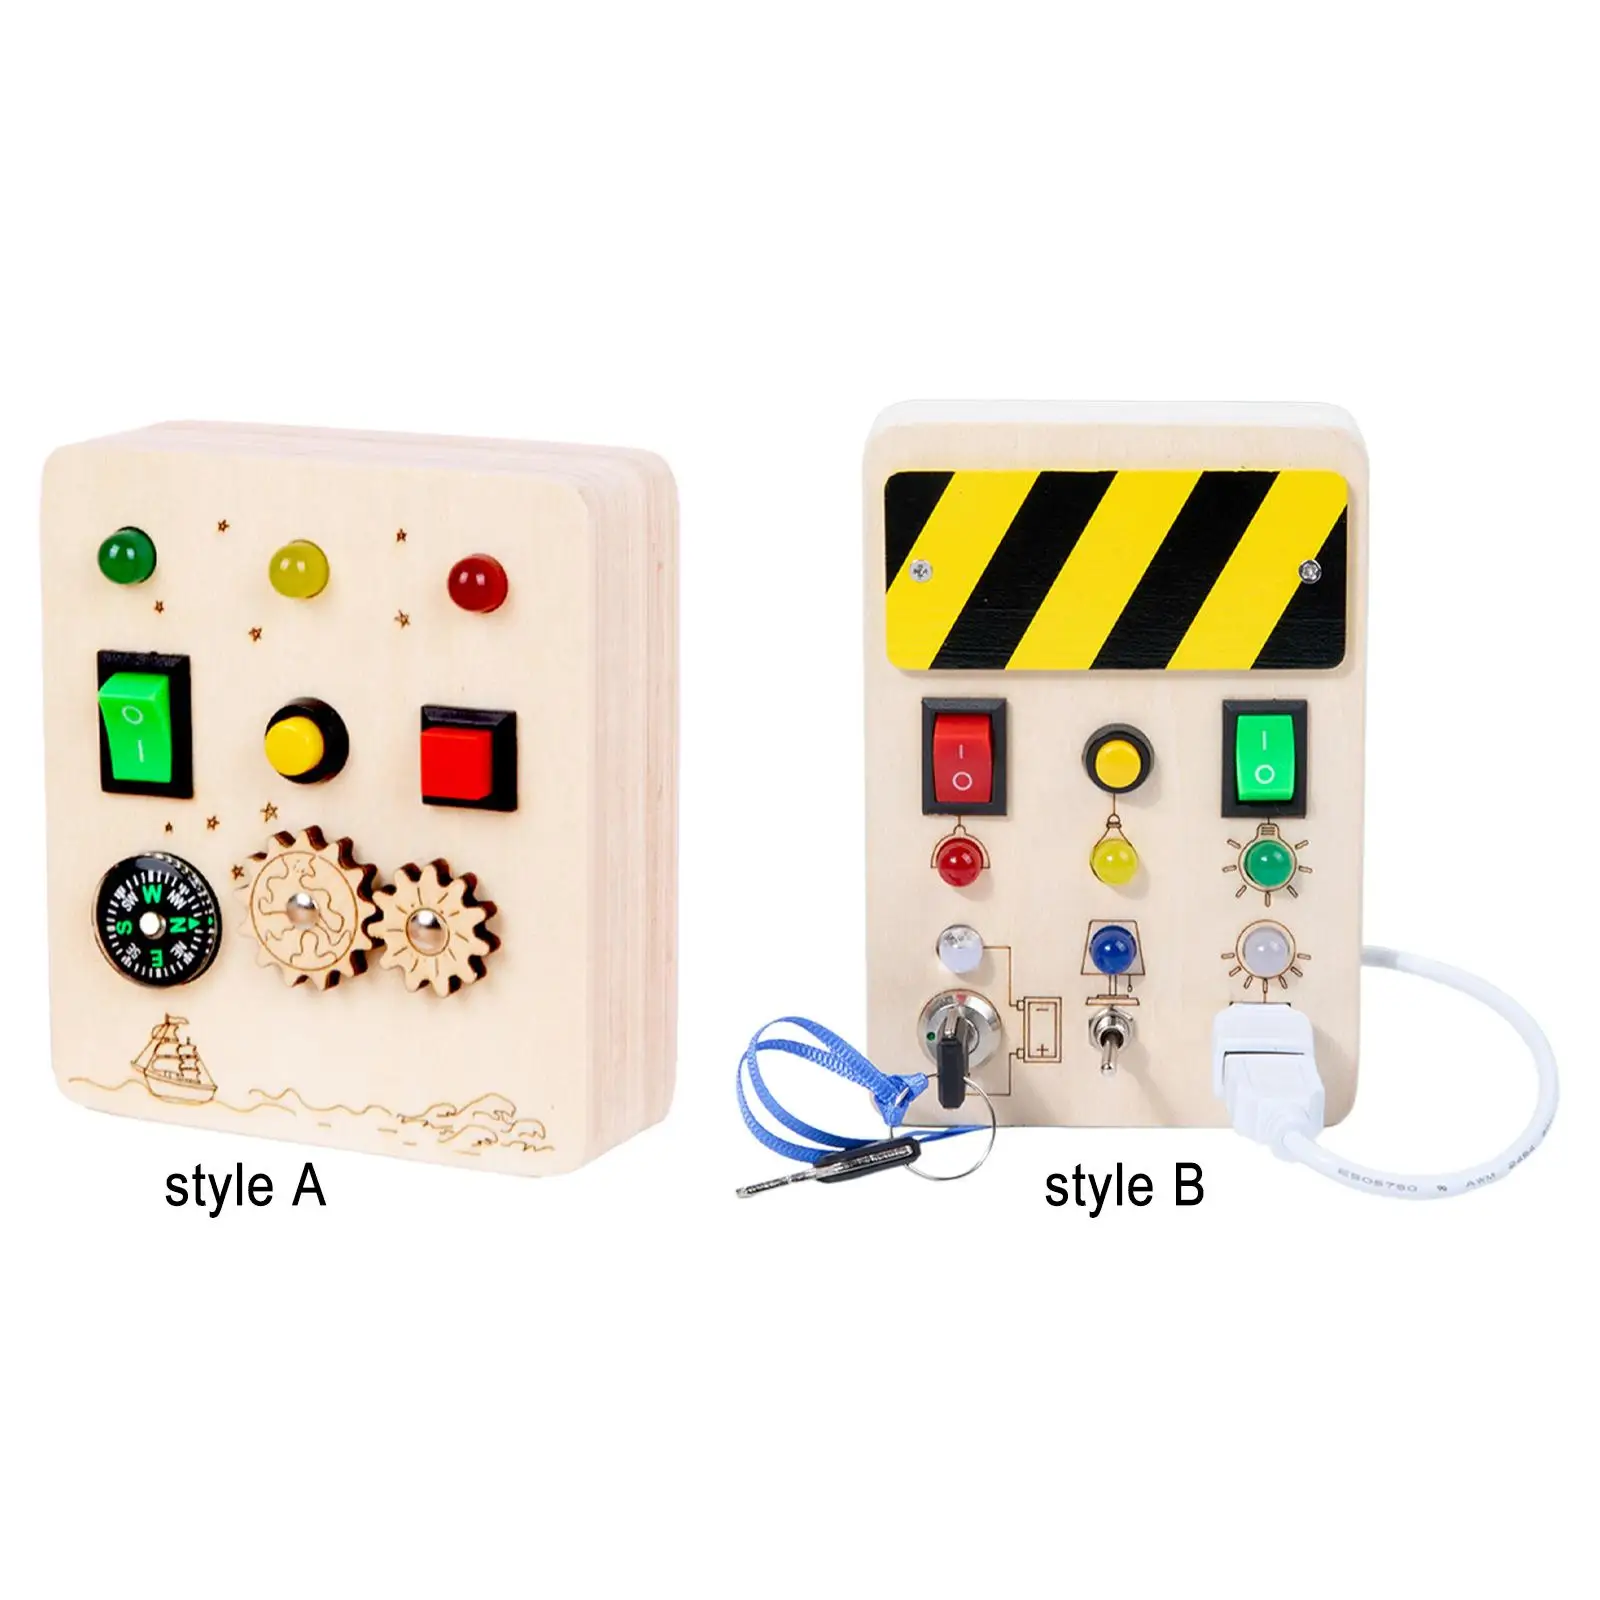 

LED Light Switch Busy Board Travel Toys for Educational for Outdoor Exercise